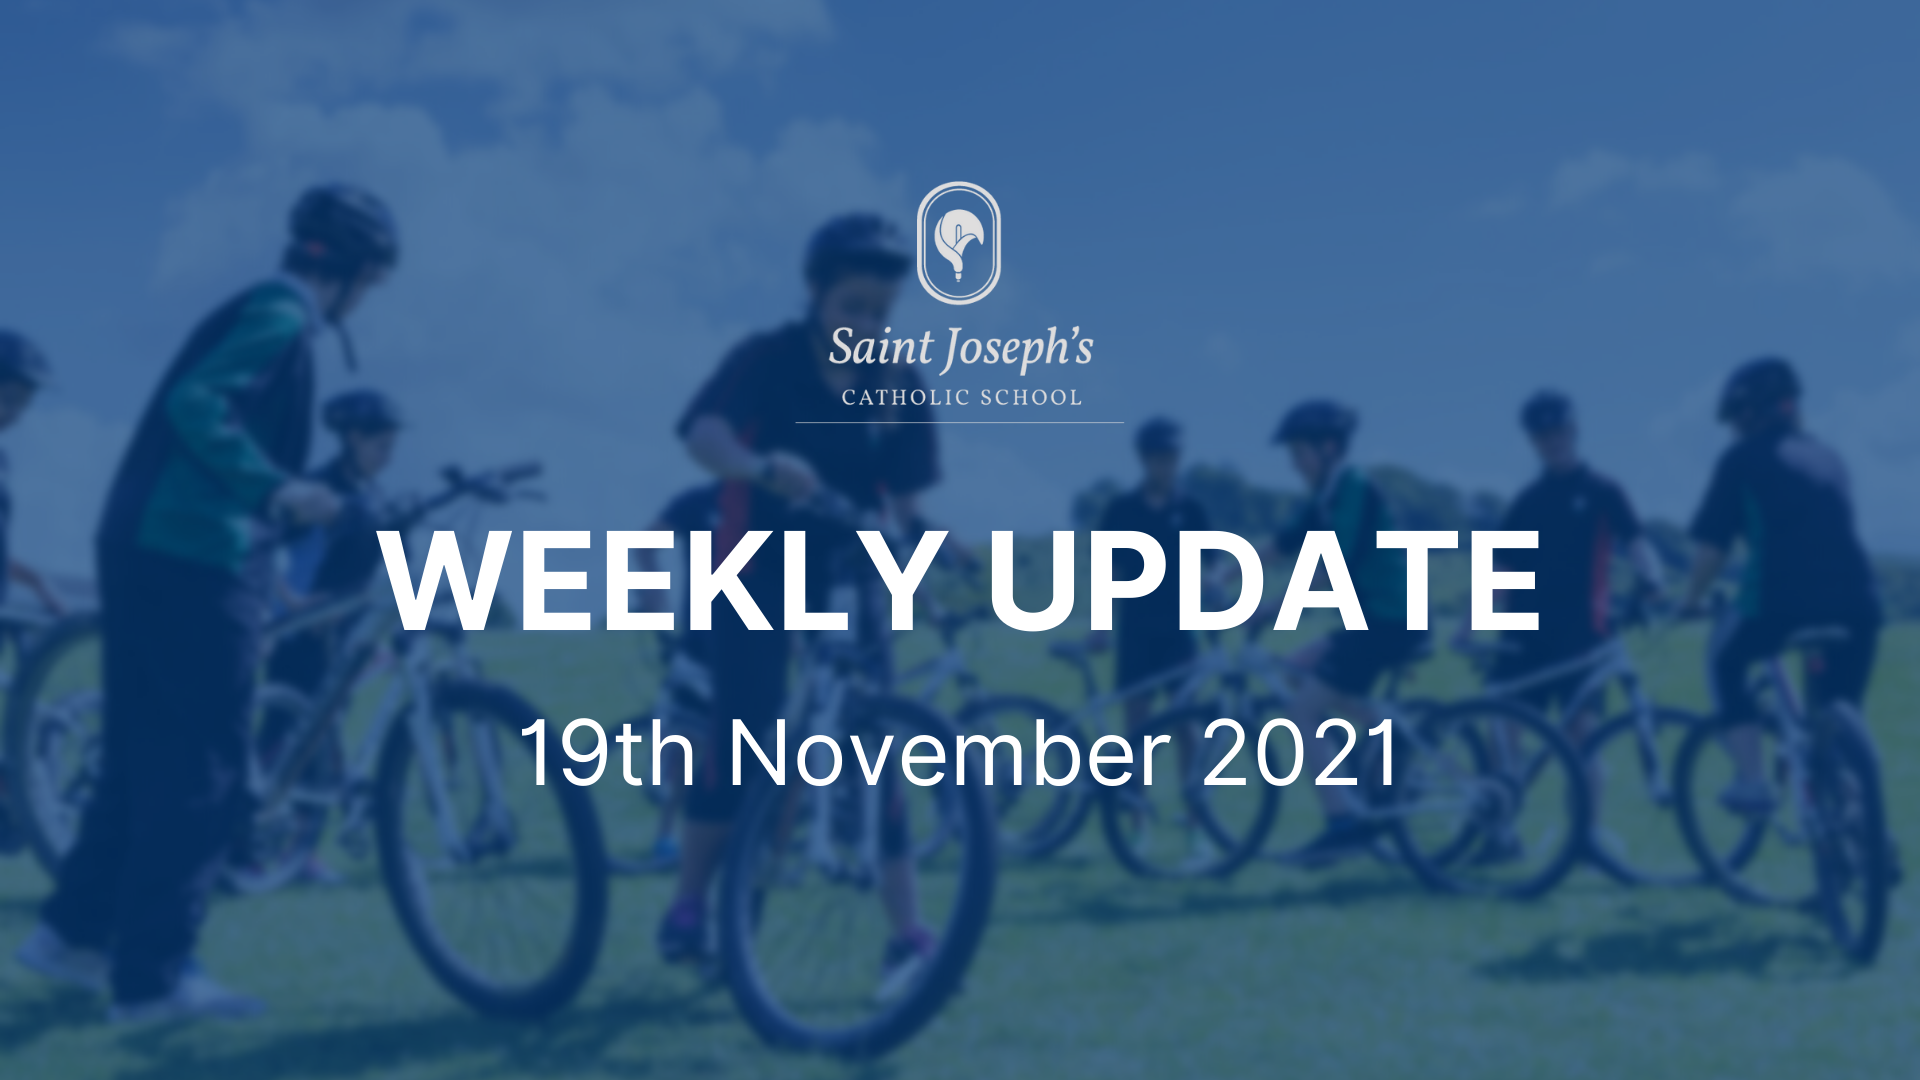 Featured image for “Weekly Update: 19th November 2021”